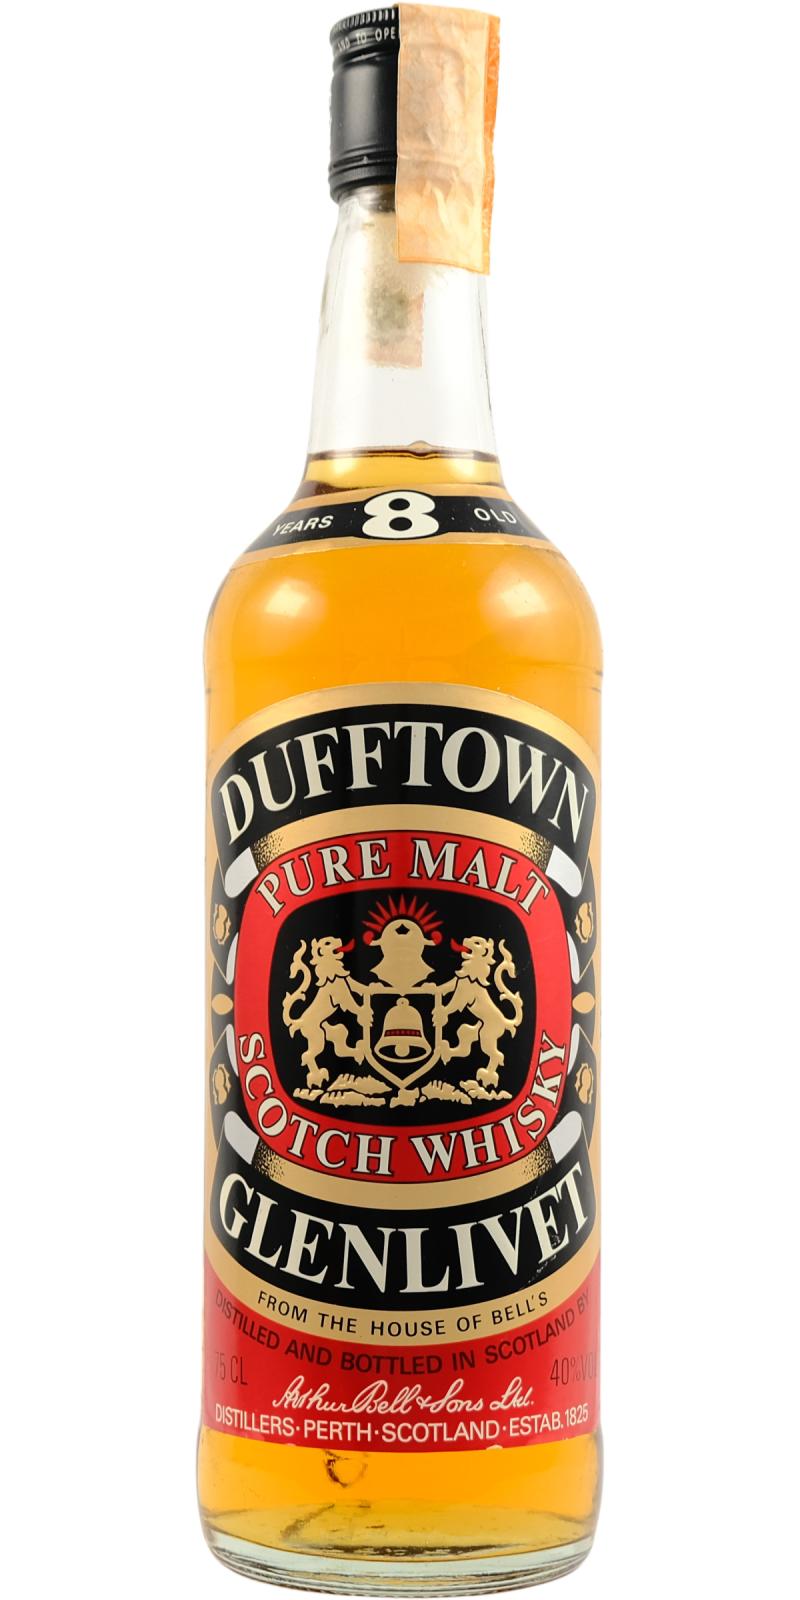 Dufftown 08-year-old